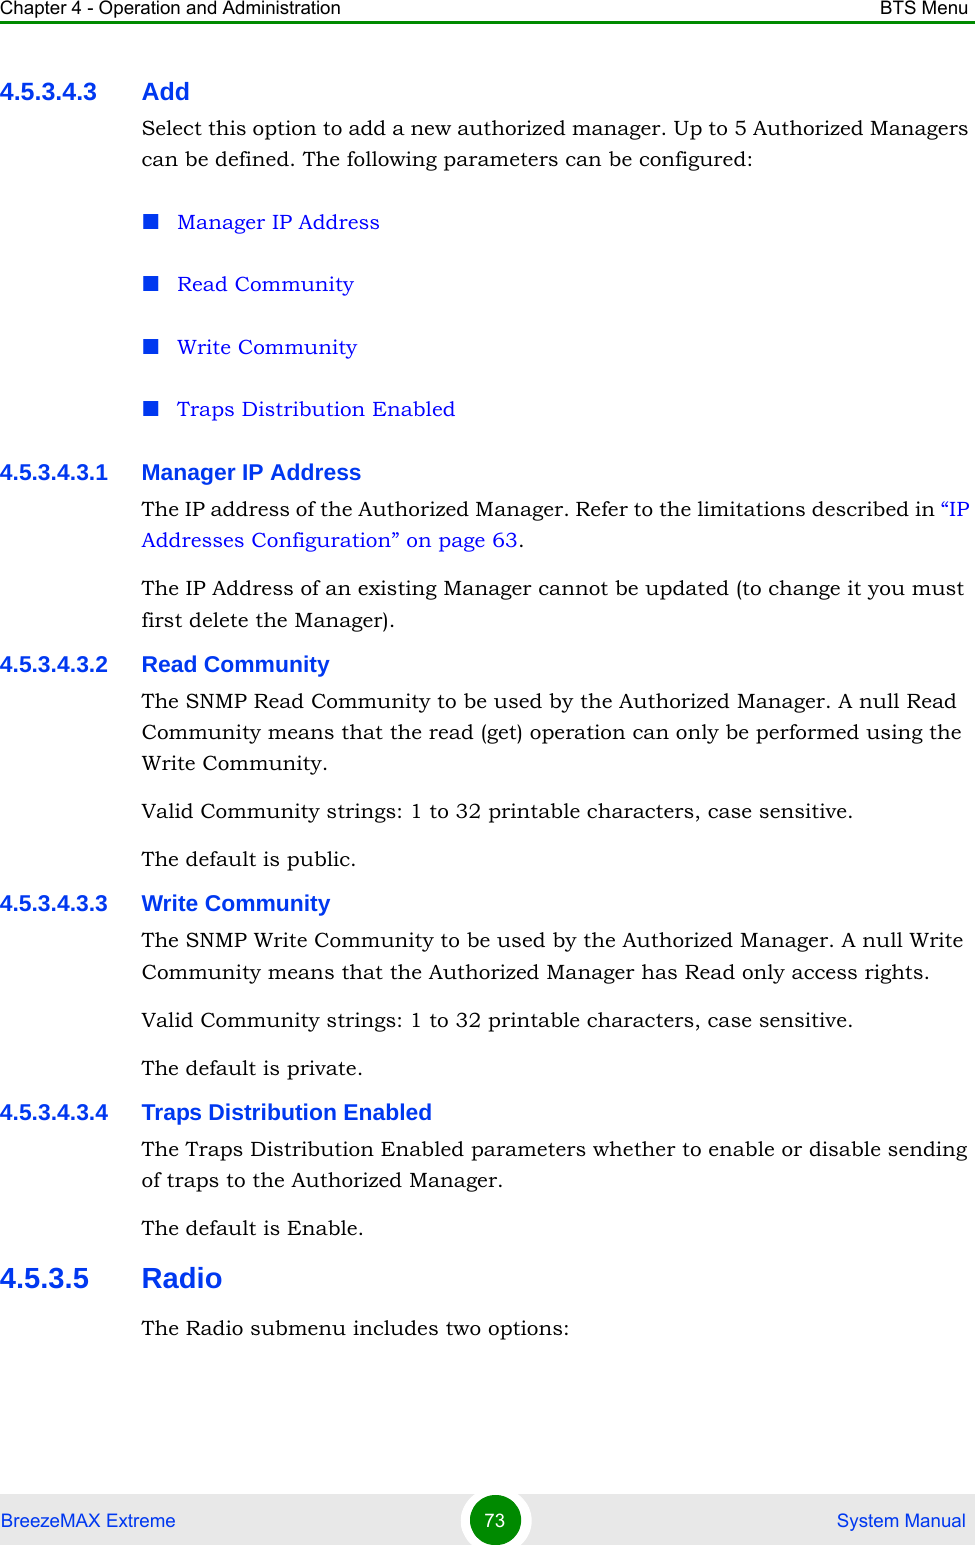 Chapter 4 - Operation and Administration BTS MenuBreezeMAX Extreme 73  System Manual4.5.3.4.3 AddSelect this option to add a new authorized manager. Up to 5 Authorized Managers can be defined. The following parameters can be configured:Manager IP AddressRead CommunityWrite CommunityTraps Distribution Enabled4.5.3.4.3.1 Manager IP AddressThe IP address of the Authorized Manager. Refer to the limitations described in “IP Addresses Configuration” on page 63.The IP Address of an existing Manager cannot be updated (to change it you must first delete the Manager).4.5.3.4.3.2 Read CommunityThe SNMP Read Community to be used by the Authorized Manager. A null Read Community means that the read (get) operation can only be performed using the Write Community.Valid Community strings: 1 to 32 printable characters, case sensitive.The default is public.4.5.3.4.3.3 Write CommunityThe SNMP Write Community to be used by the Authorized Manager. A null Write Community means that the Authorized Manager has Read only access rights.Valid Community strings: 1 to 32 printable characters, case sensitive.The default is private.4.5.3.4.3.4 Traps Distribution EnabledThe Traps Distribution Enabled parameters whether to enable or disable sending of traps to the Authorized Manager.The default is Enable.4.5.3.5 RadioThe Radio submenu includes two options: